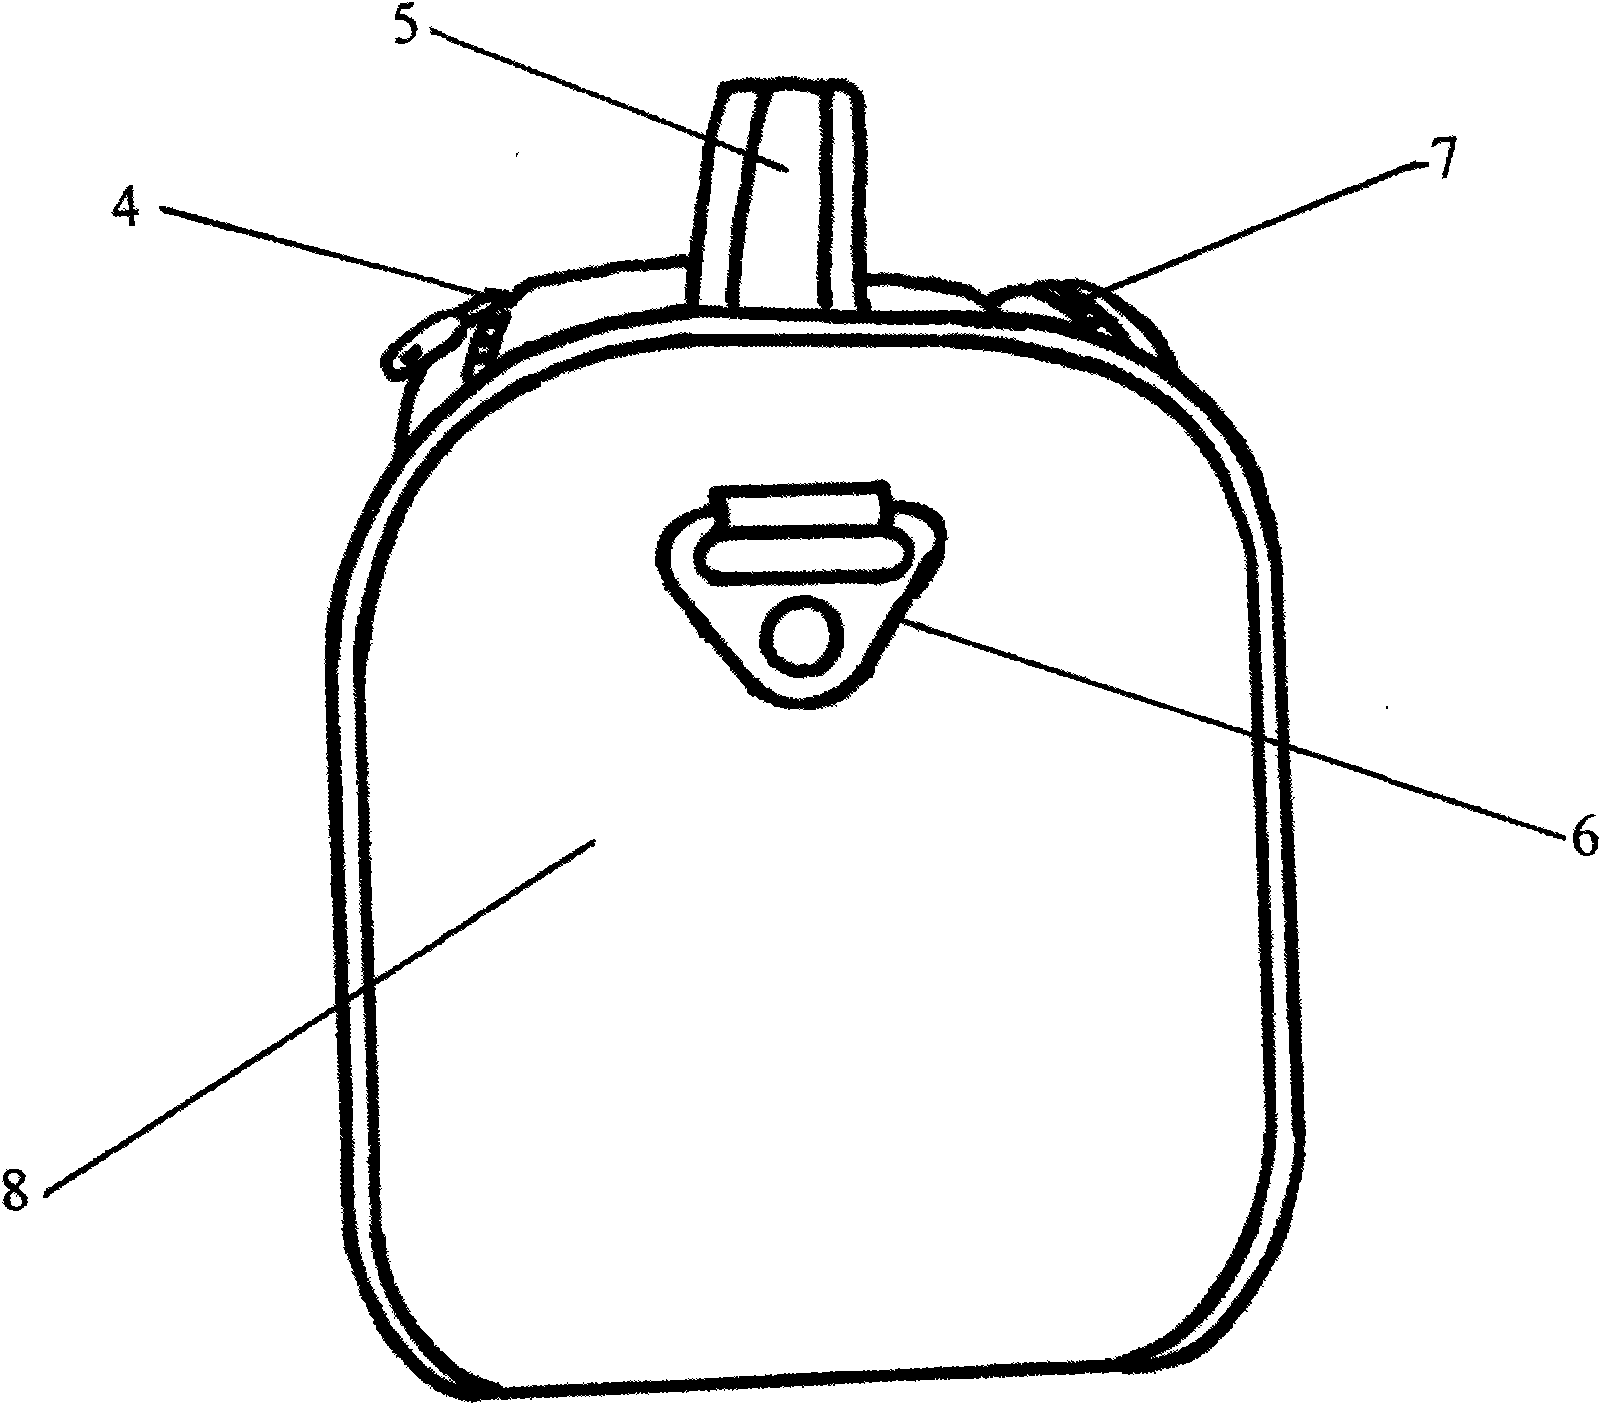 Hand bag with convex bags and zippers on front and back